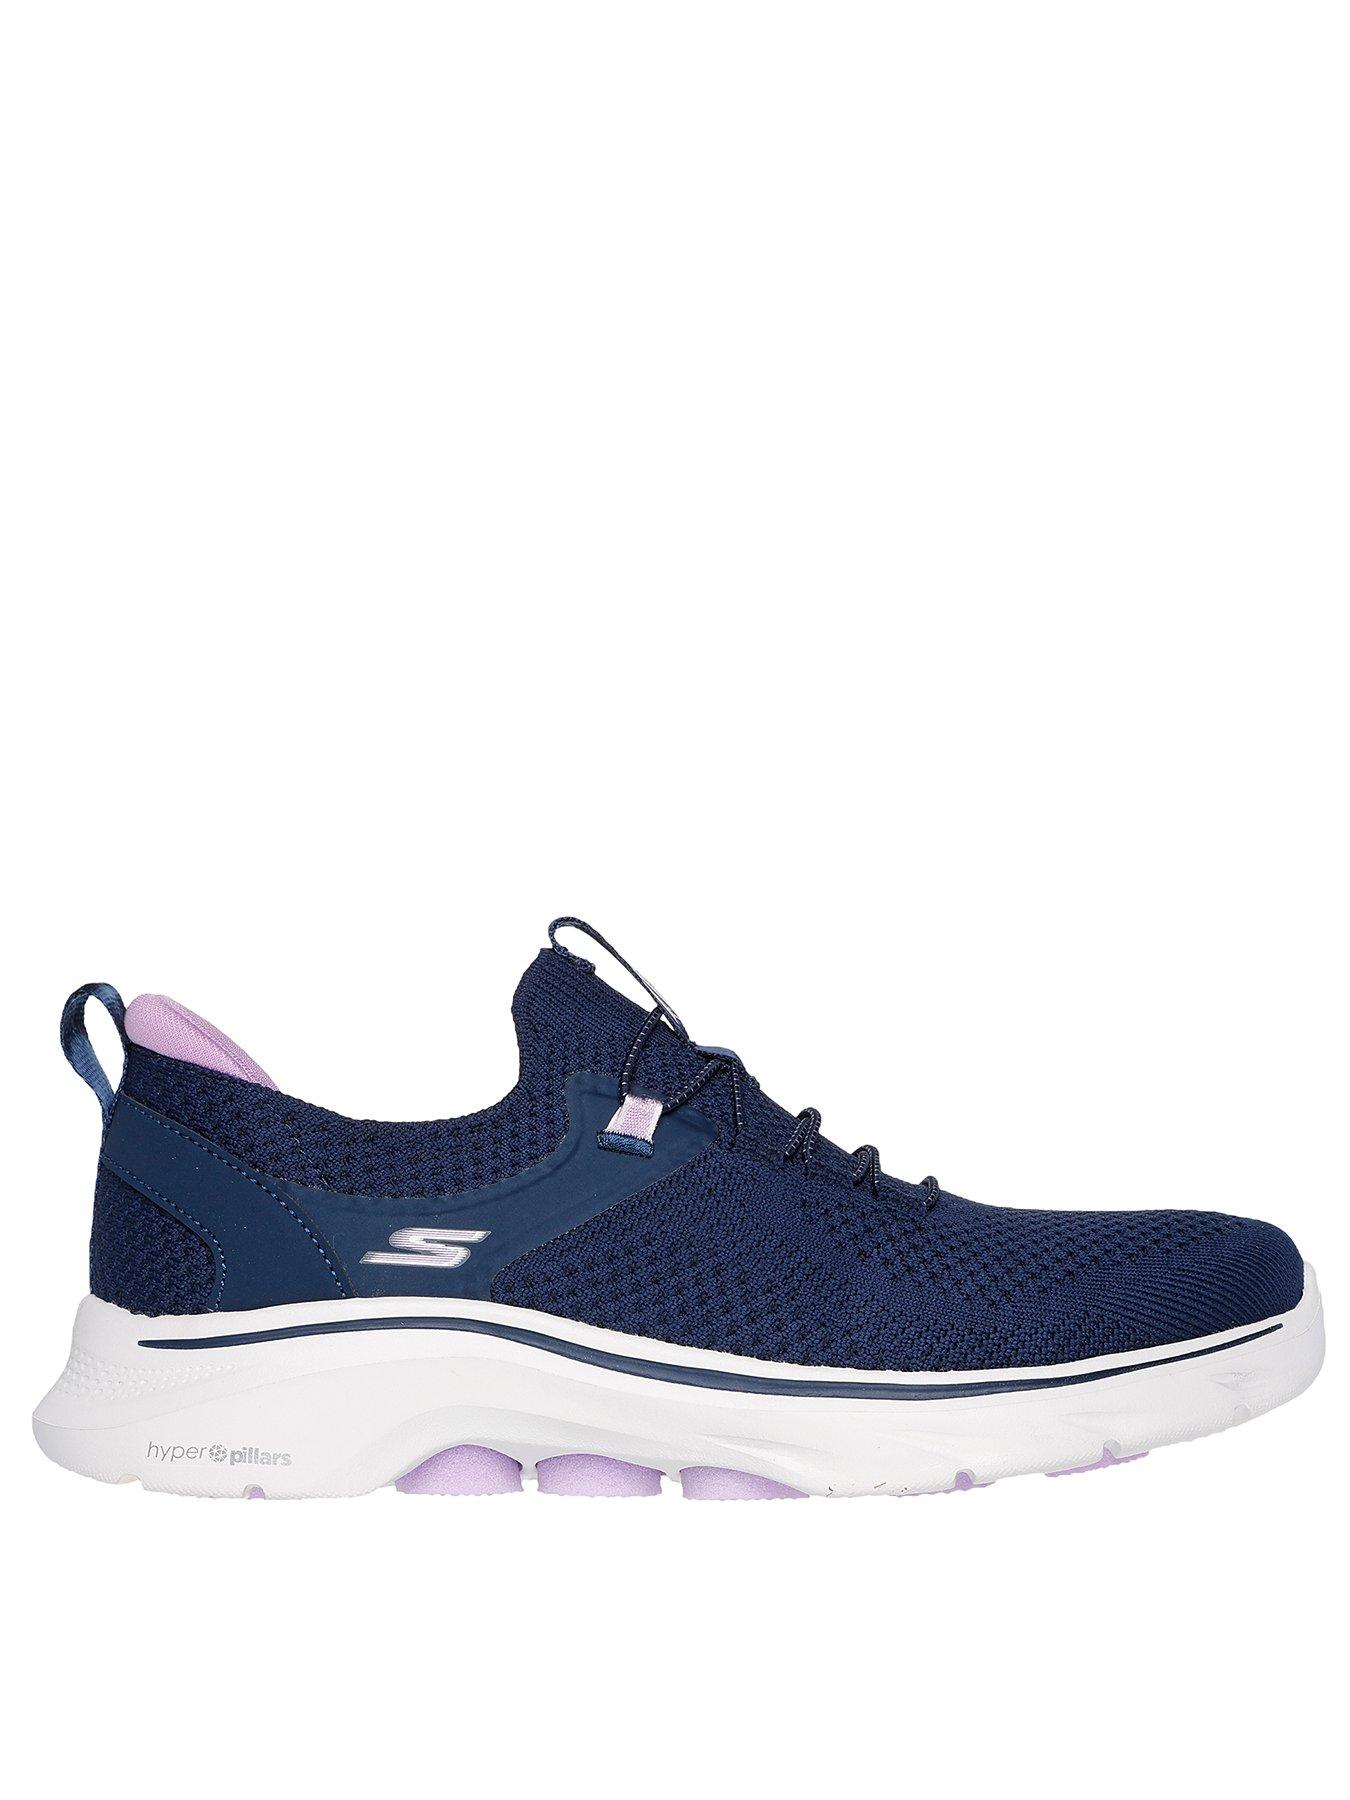 Skechers Go Walk 7 Laced Knit Slip On Trainers - Navy & Lavender